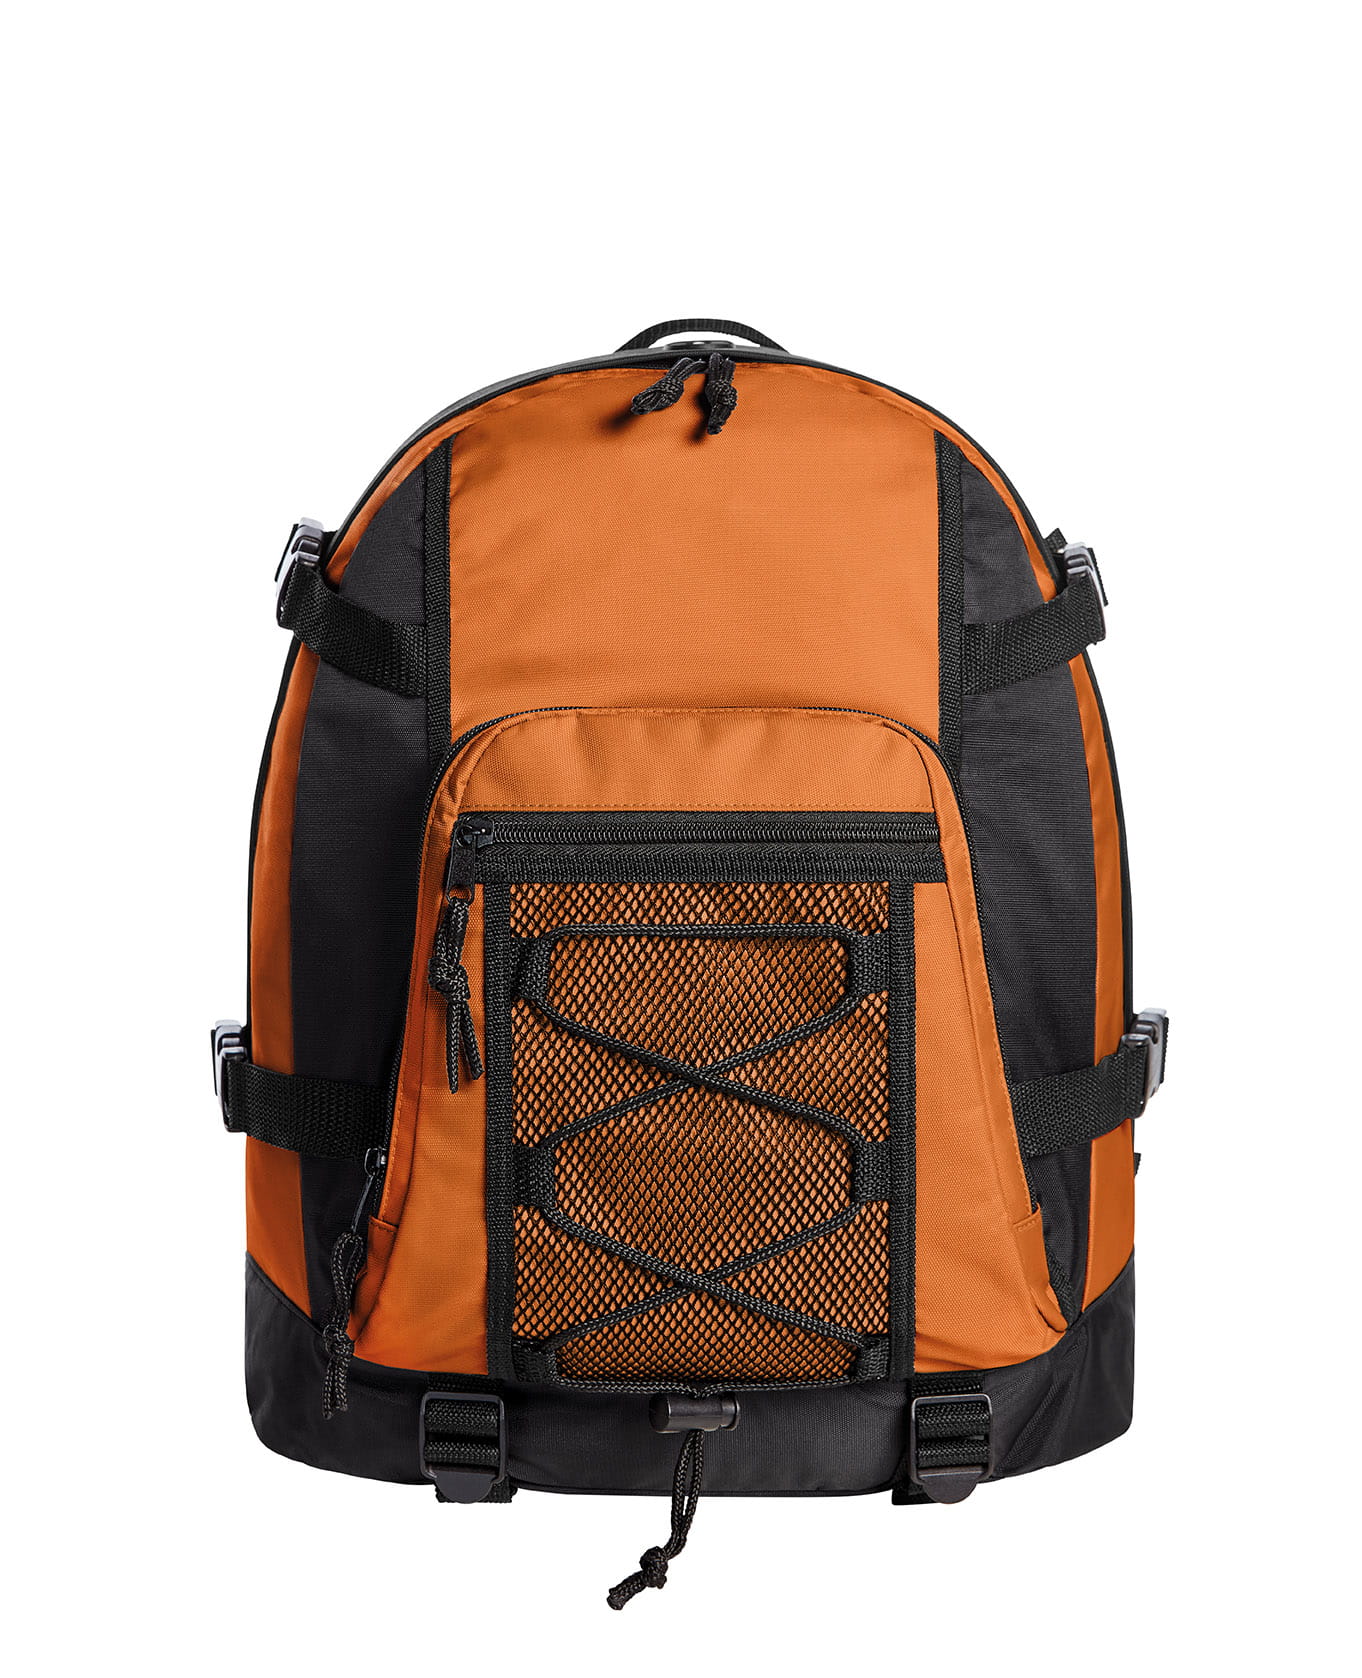 Freediving Backpacks Spearfishing Experts, 43% OFF